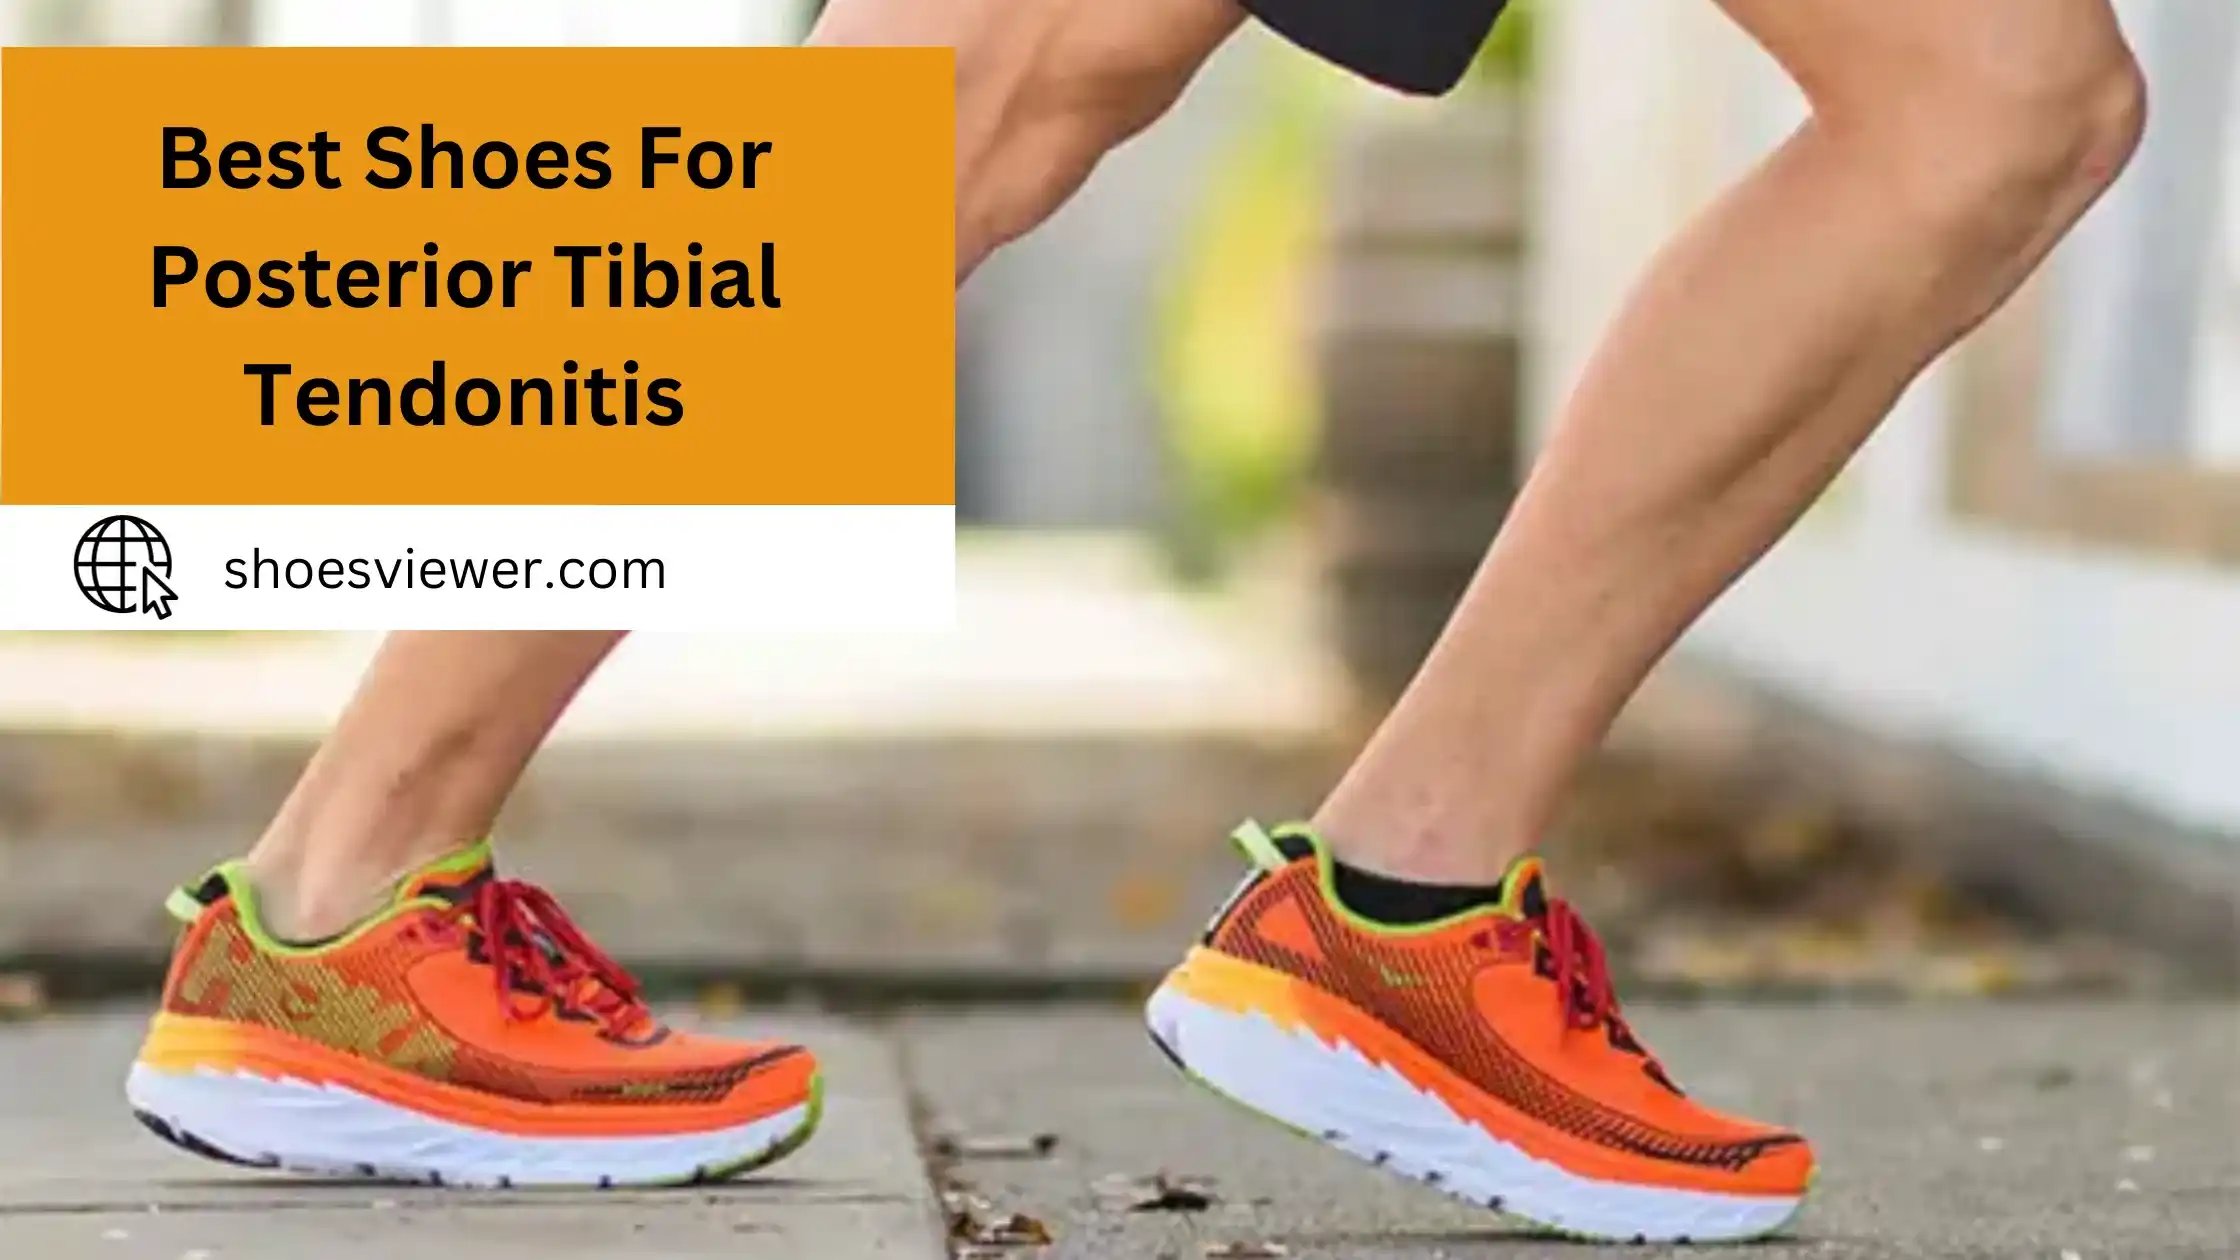 Best Shoes For Posterior Tibial Tendonitis - Latest Guide